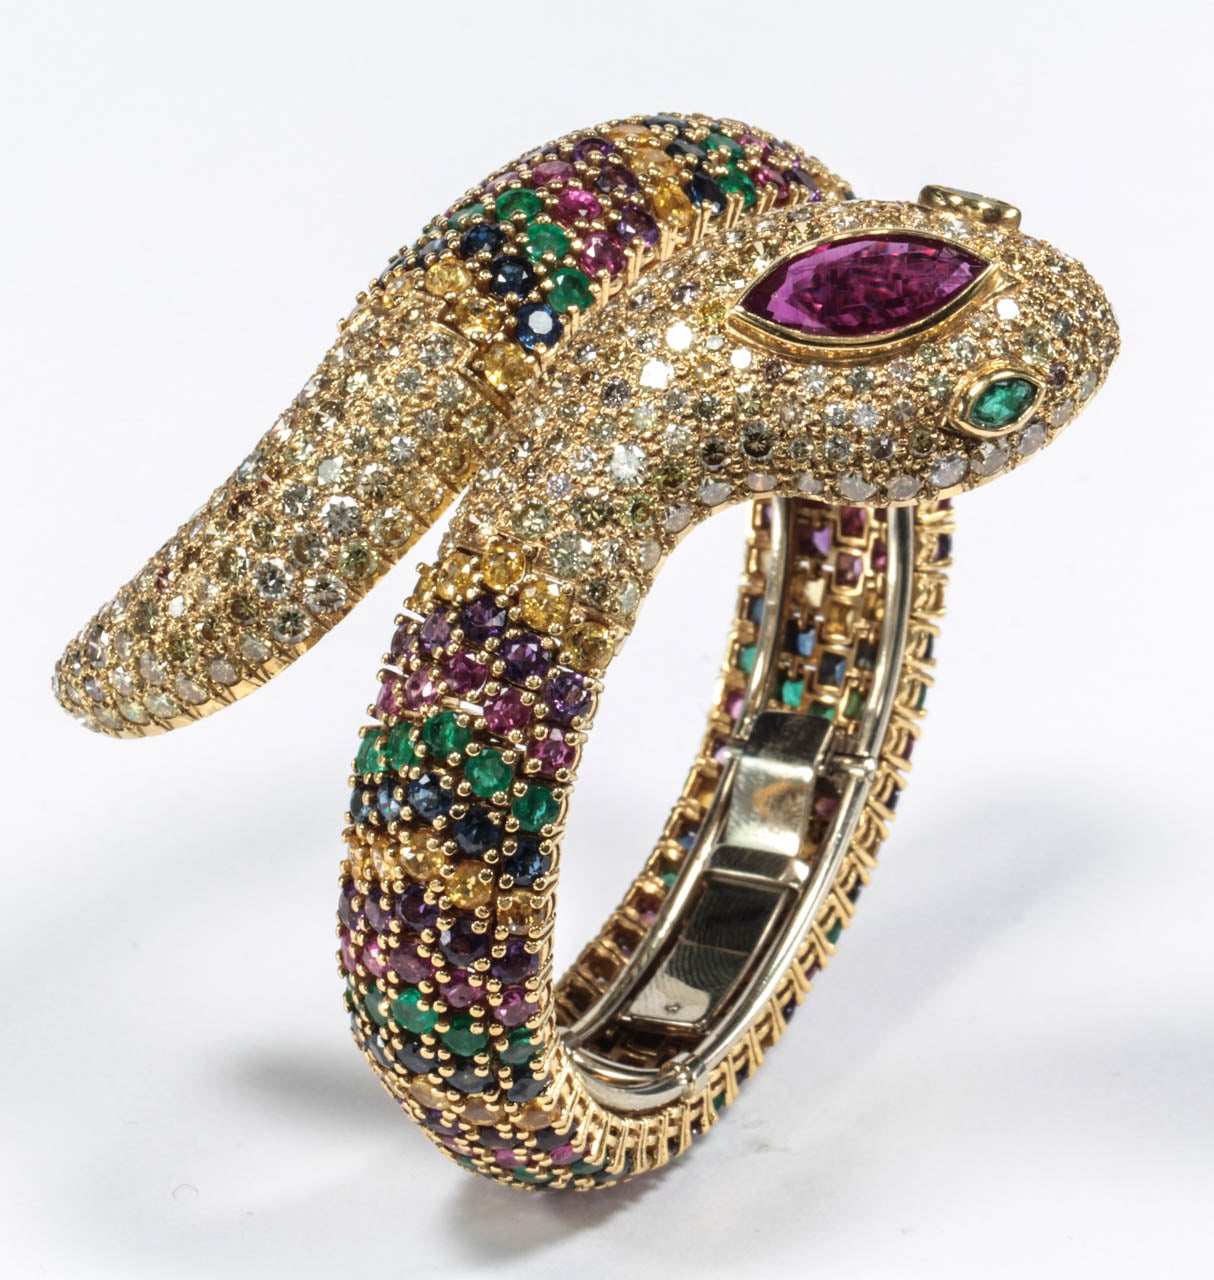 The articulated body set with circular Rubies, Amethysts, Yellow Sapphires, Blue Sapphires and Emeralds, the head and tail decorated with brilliant-cut diamonds, the head set with a marquise-shaped Ruby and similarly-cut Emerald eyes.